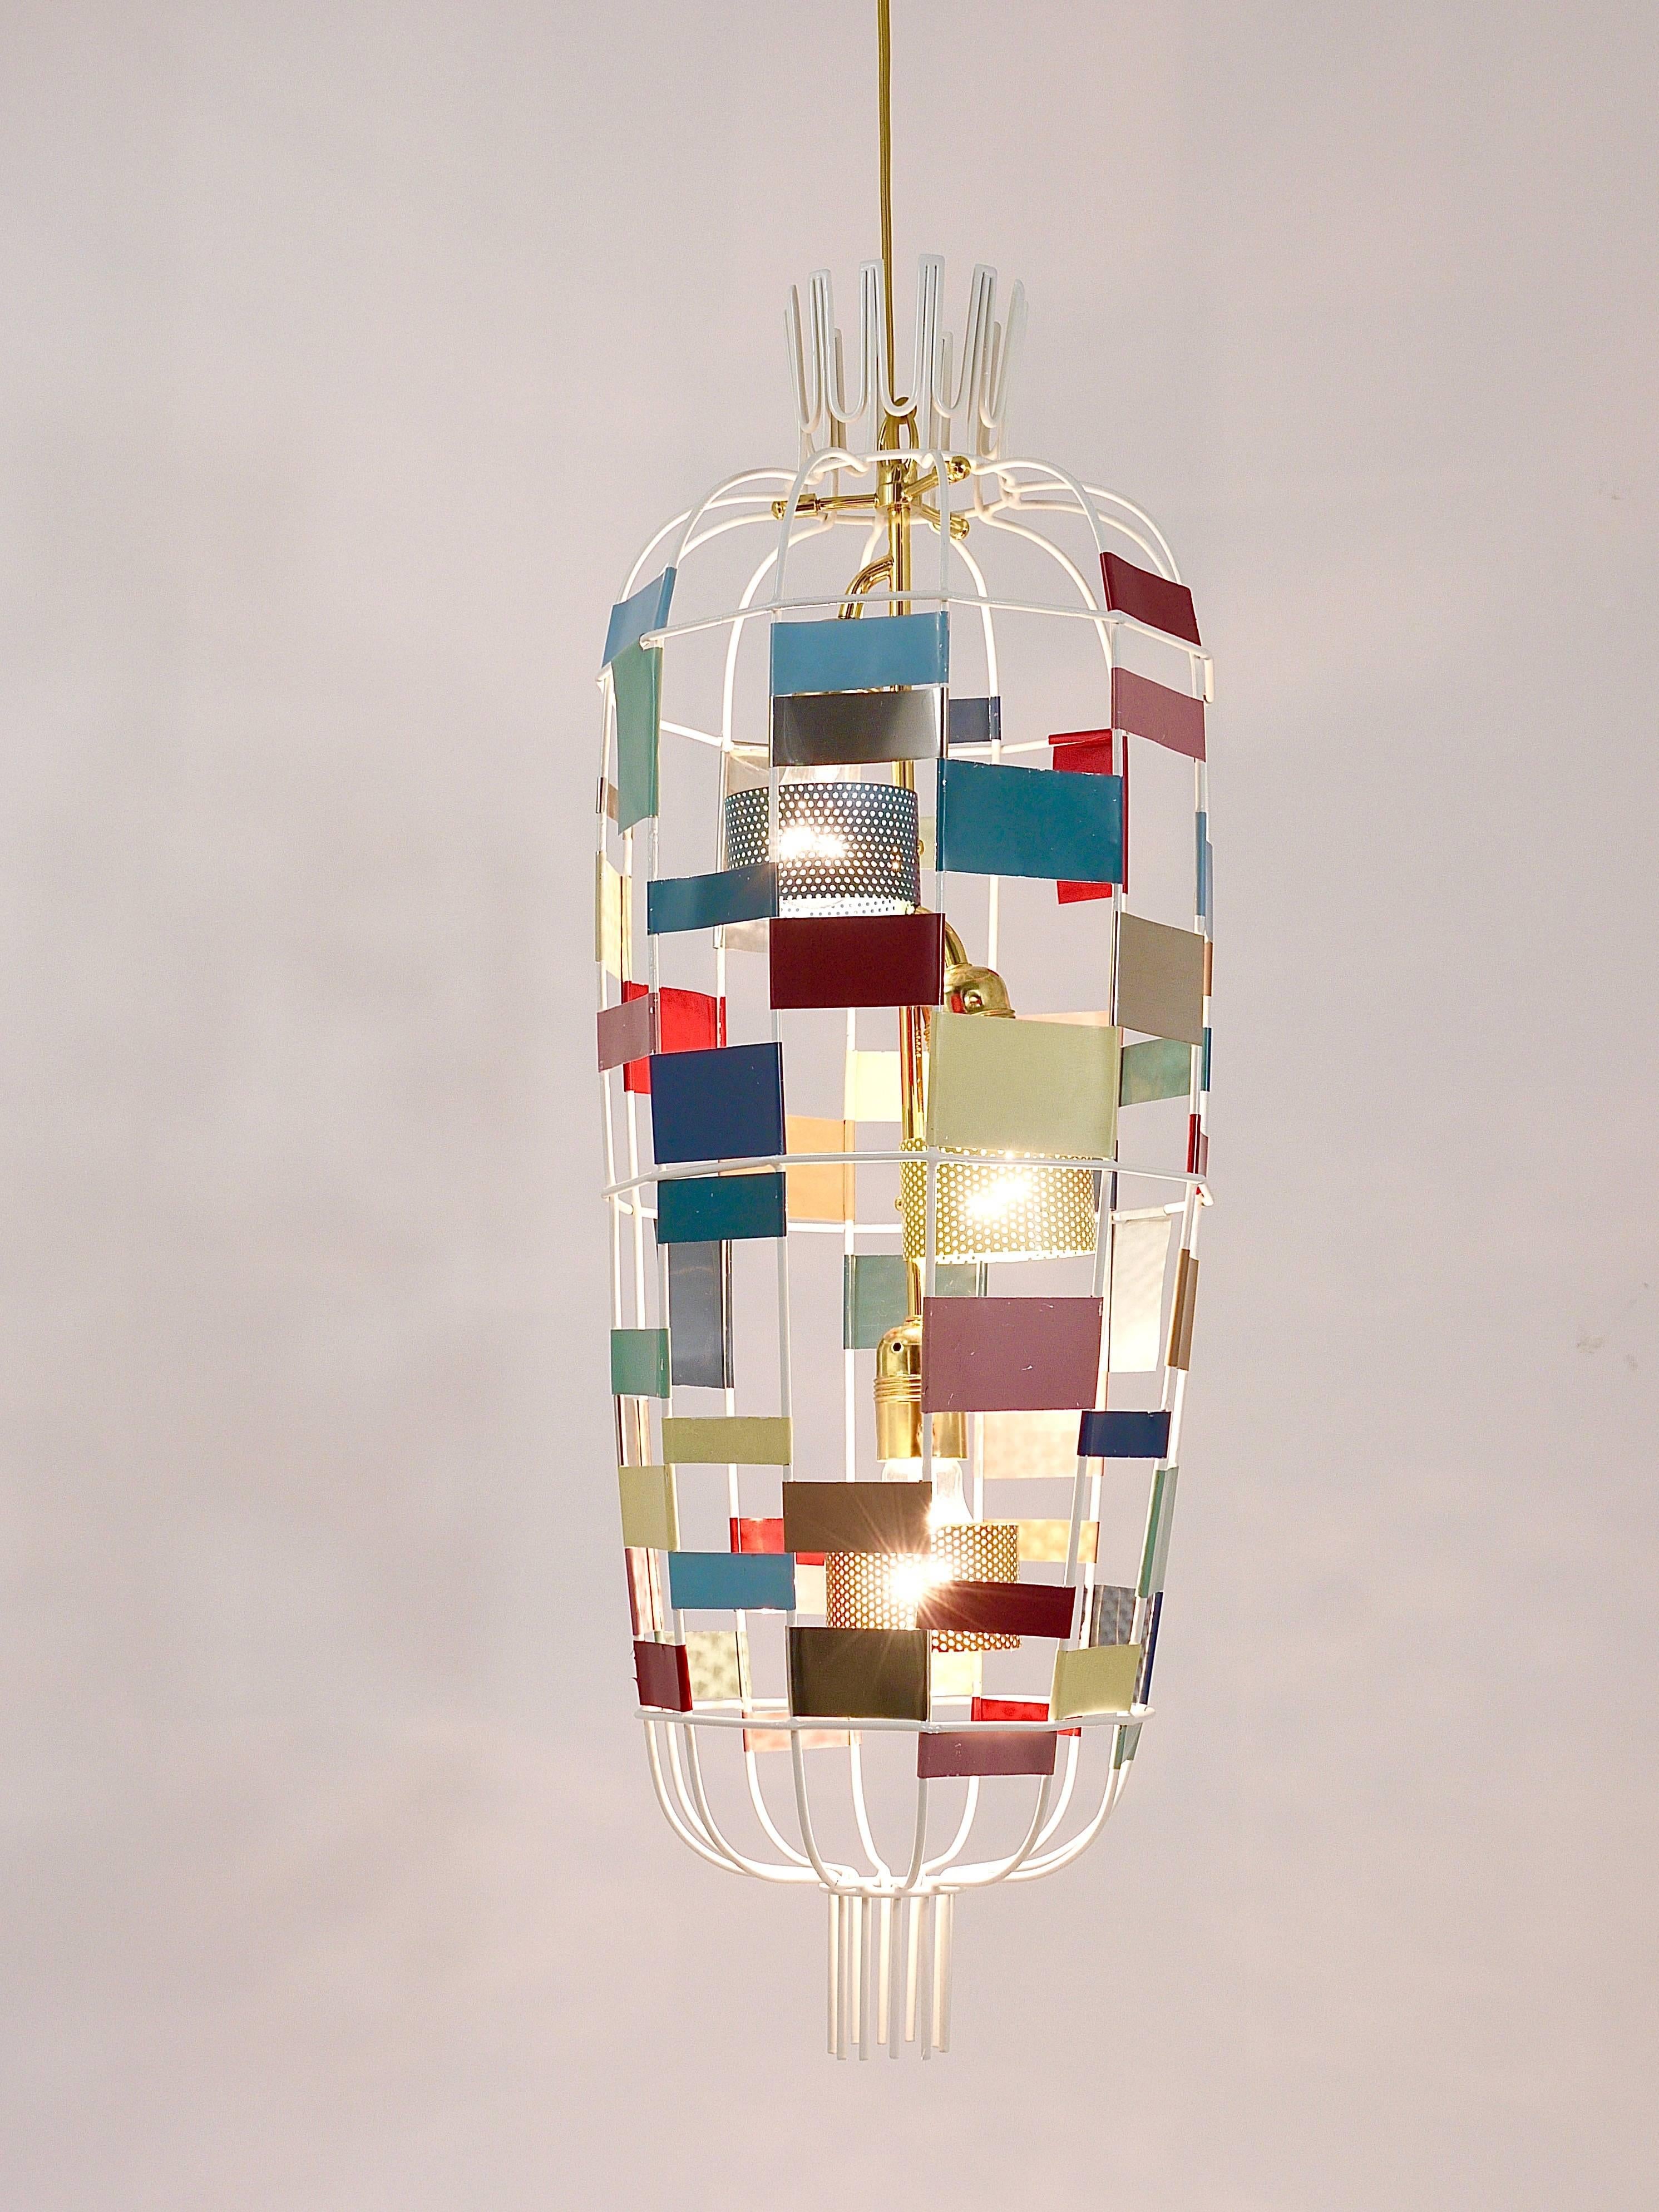 A charming Mid-Century Modern French chandelier / pendant light from the 1950s in the style of Jacques Biny / Luminalite. Multicolored square metal sheets in different sizes on a white metal corpus with a lot of beautiful brass details, like little